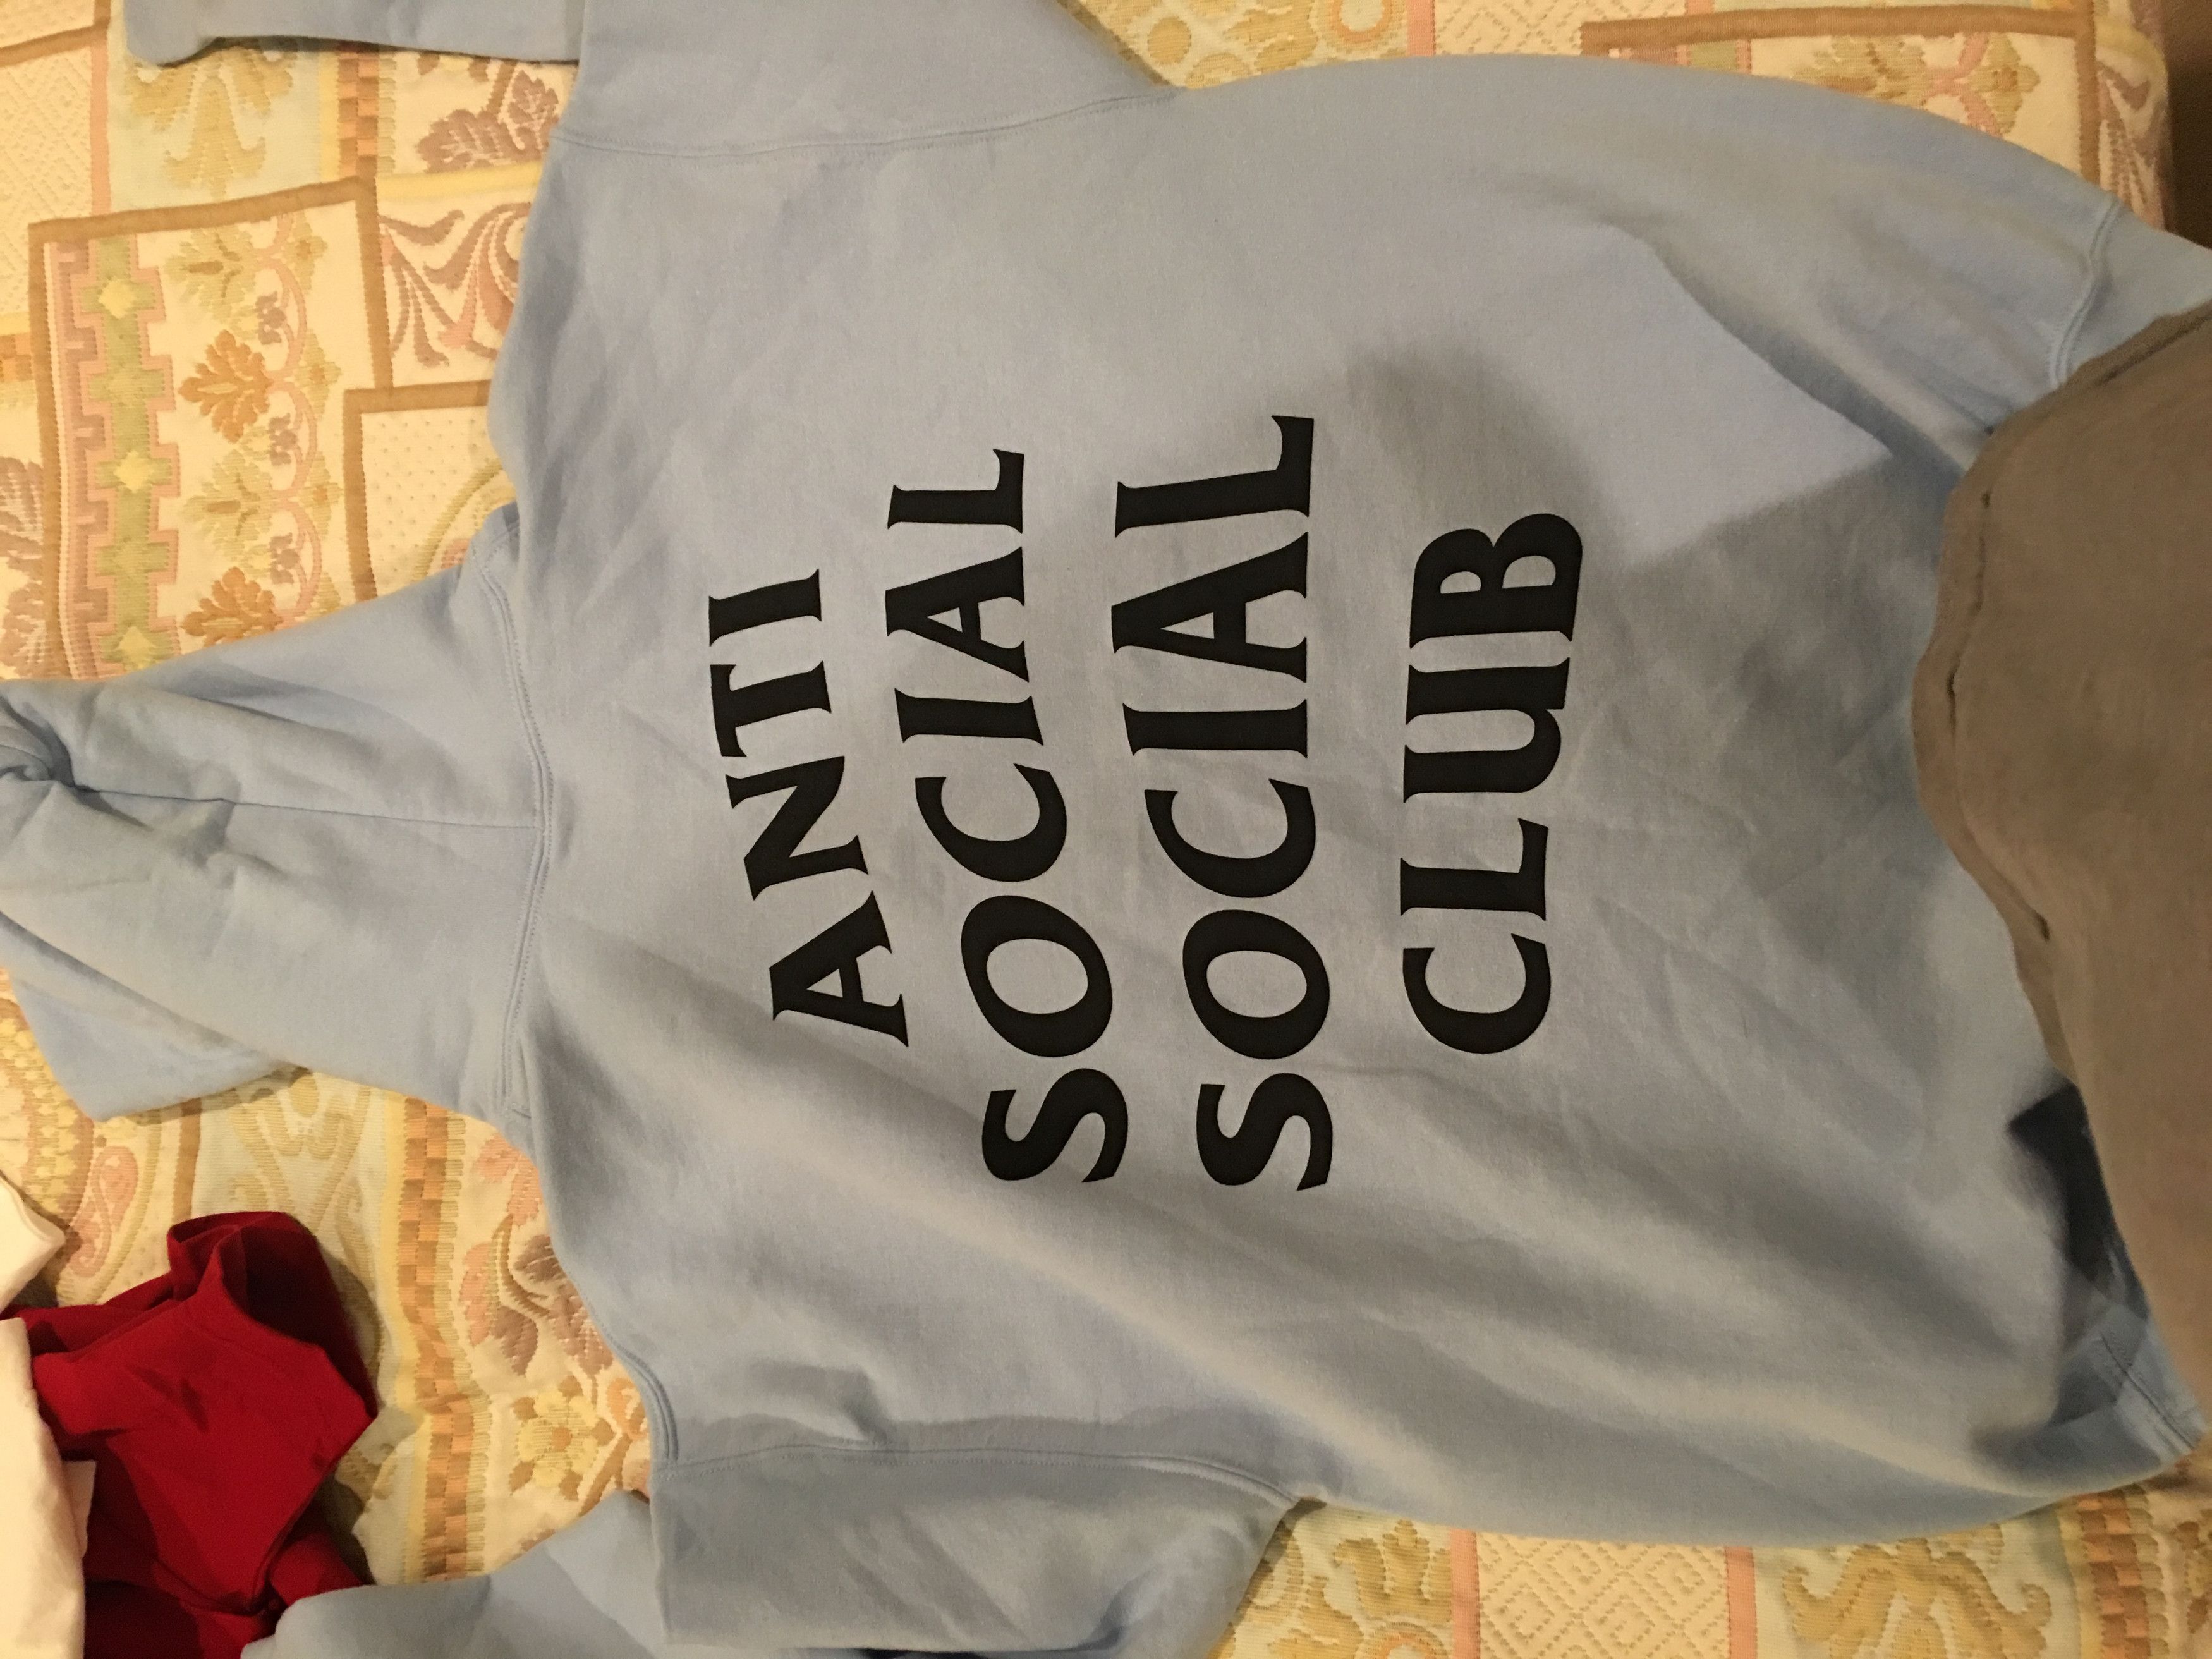 Anti Social Social Club anti social social club baby blue hoodie Size US L / EU 52-54 / 3 - 3 Preview